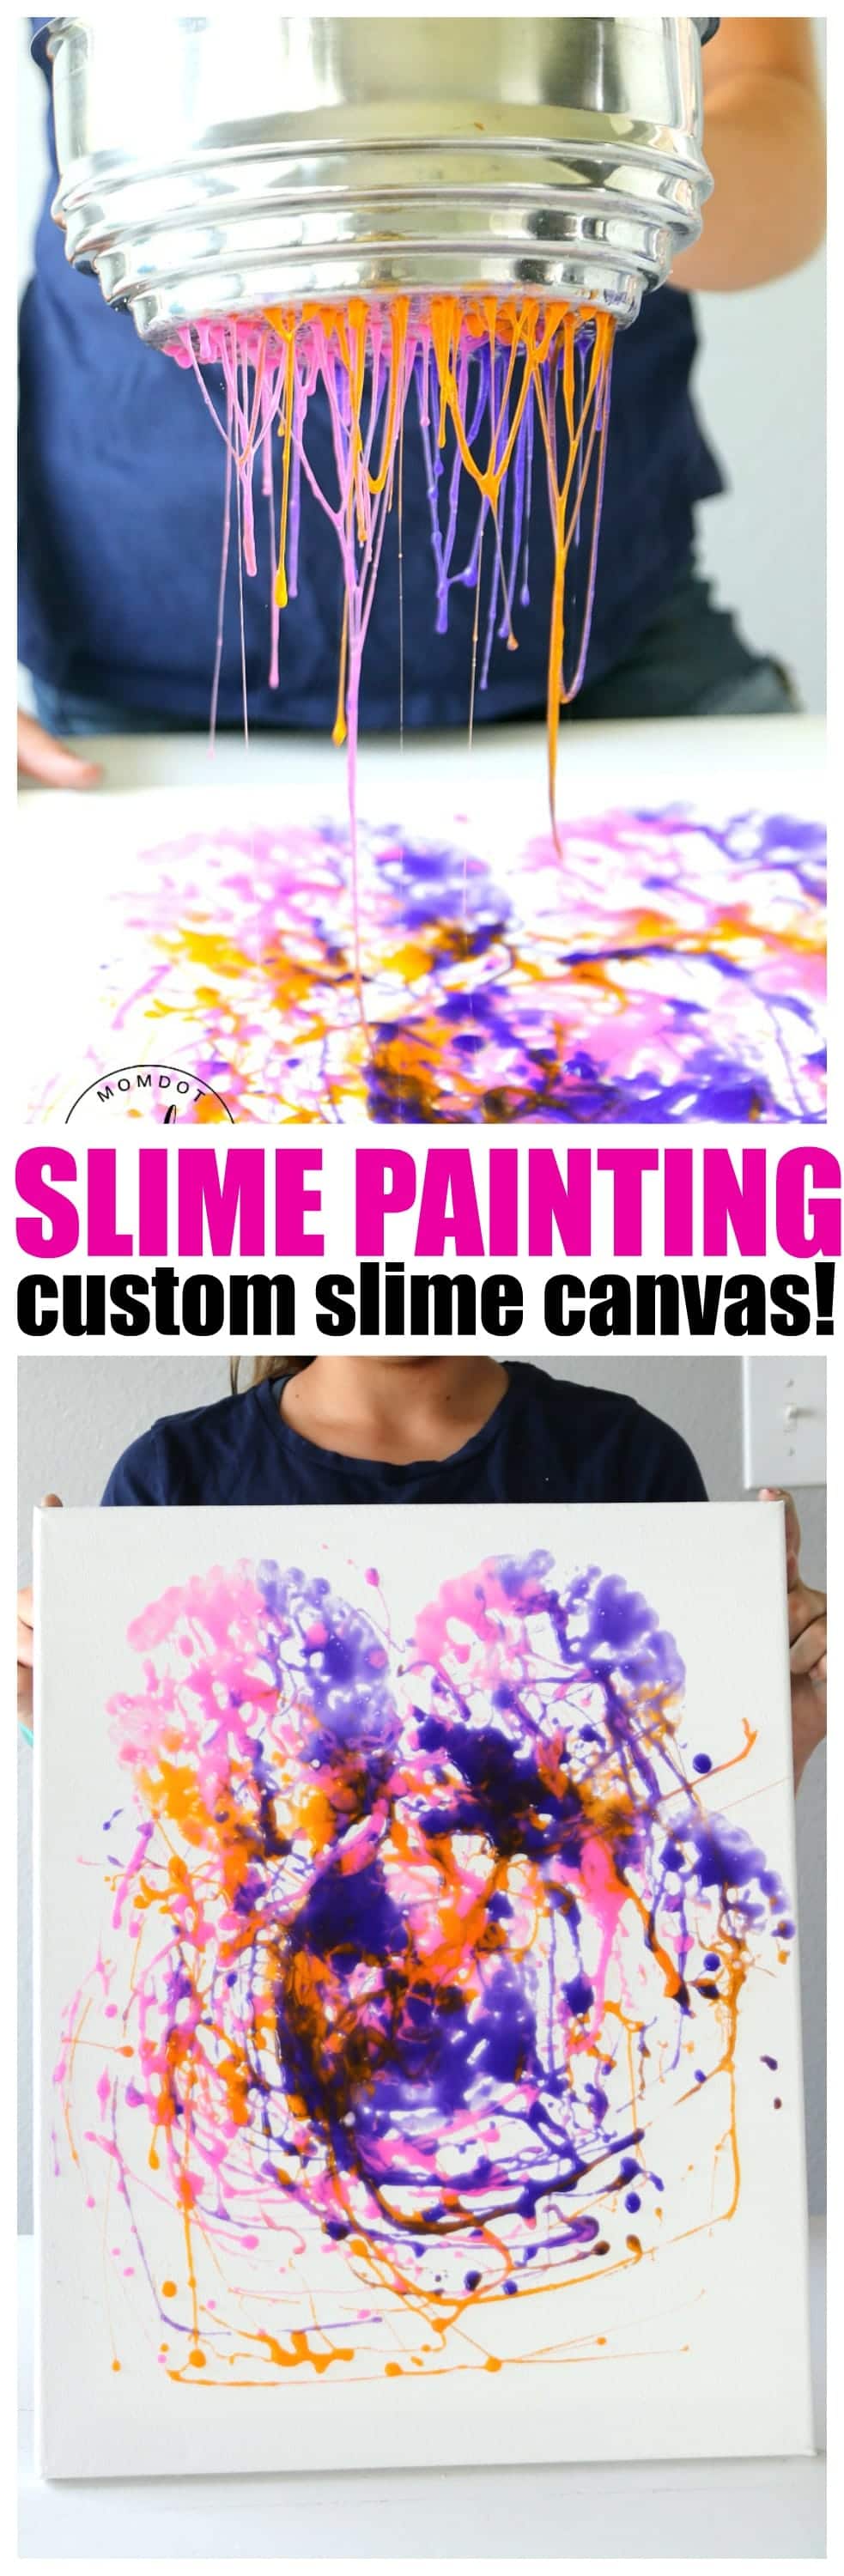 Slime Painting: Slime Recipe perfect for Painting, Canvas Painting , an awesome sensory experience